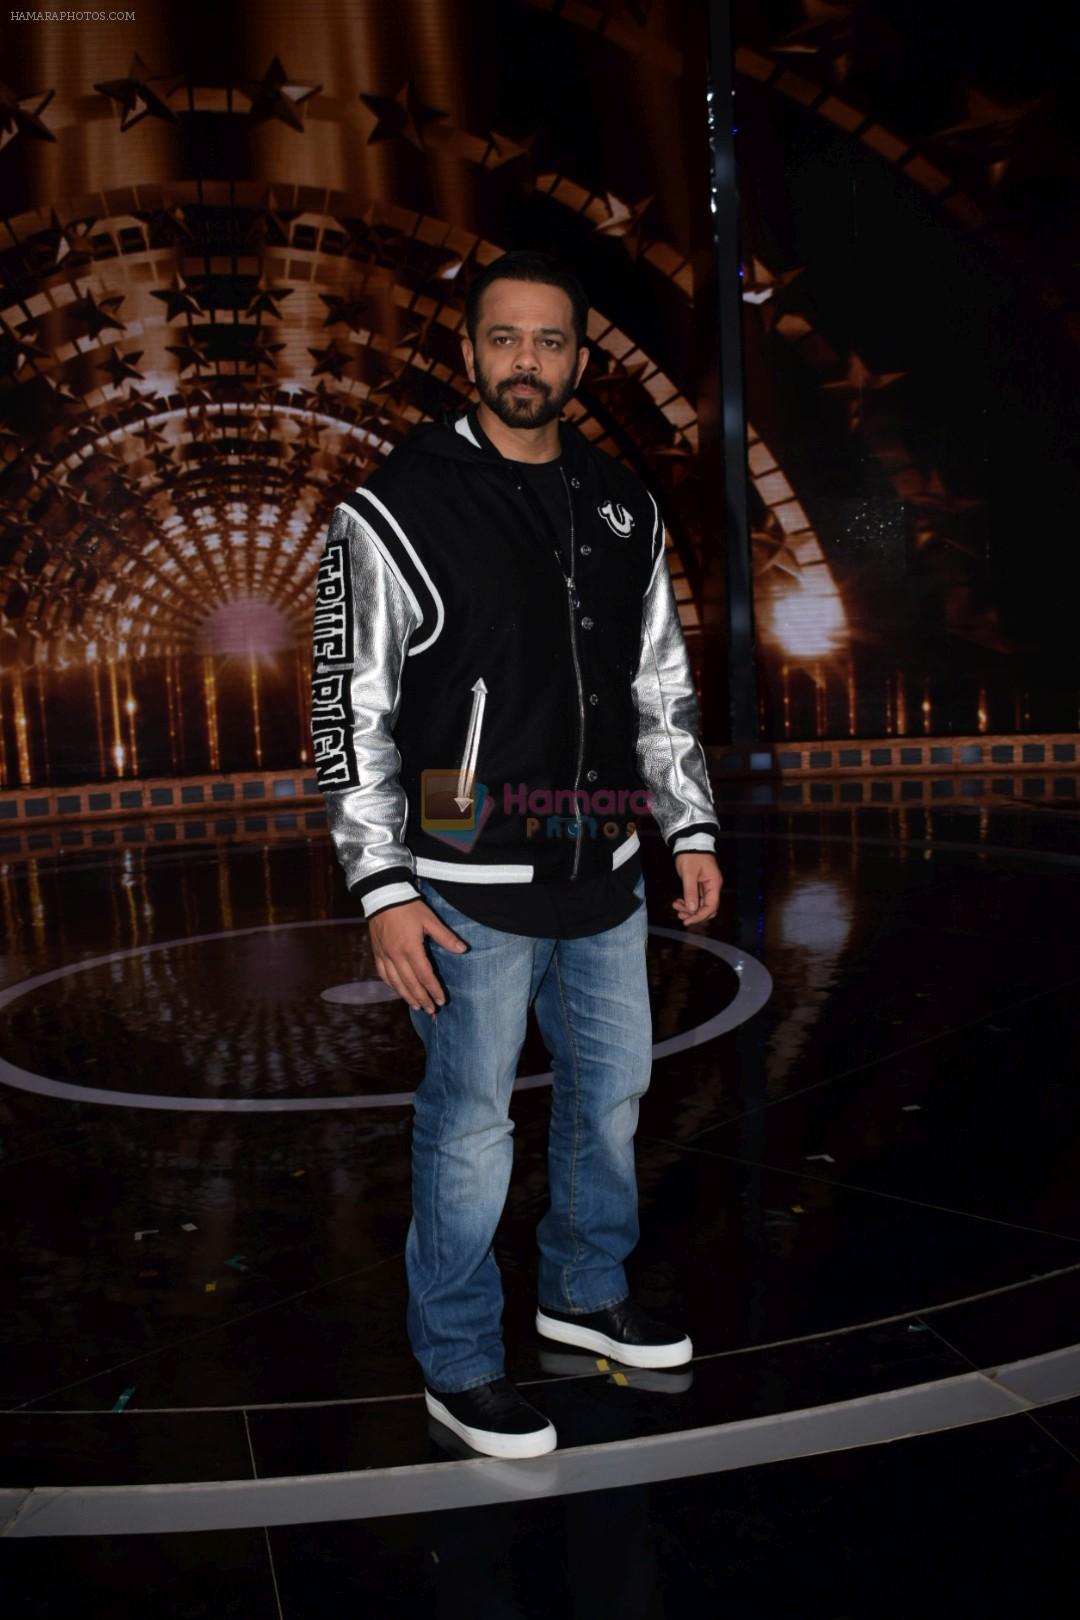 Rohit Shetty on the set of India's next superstar on 6th Jan 2018